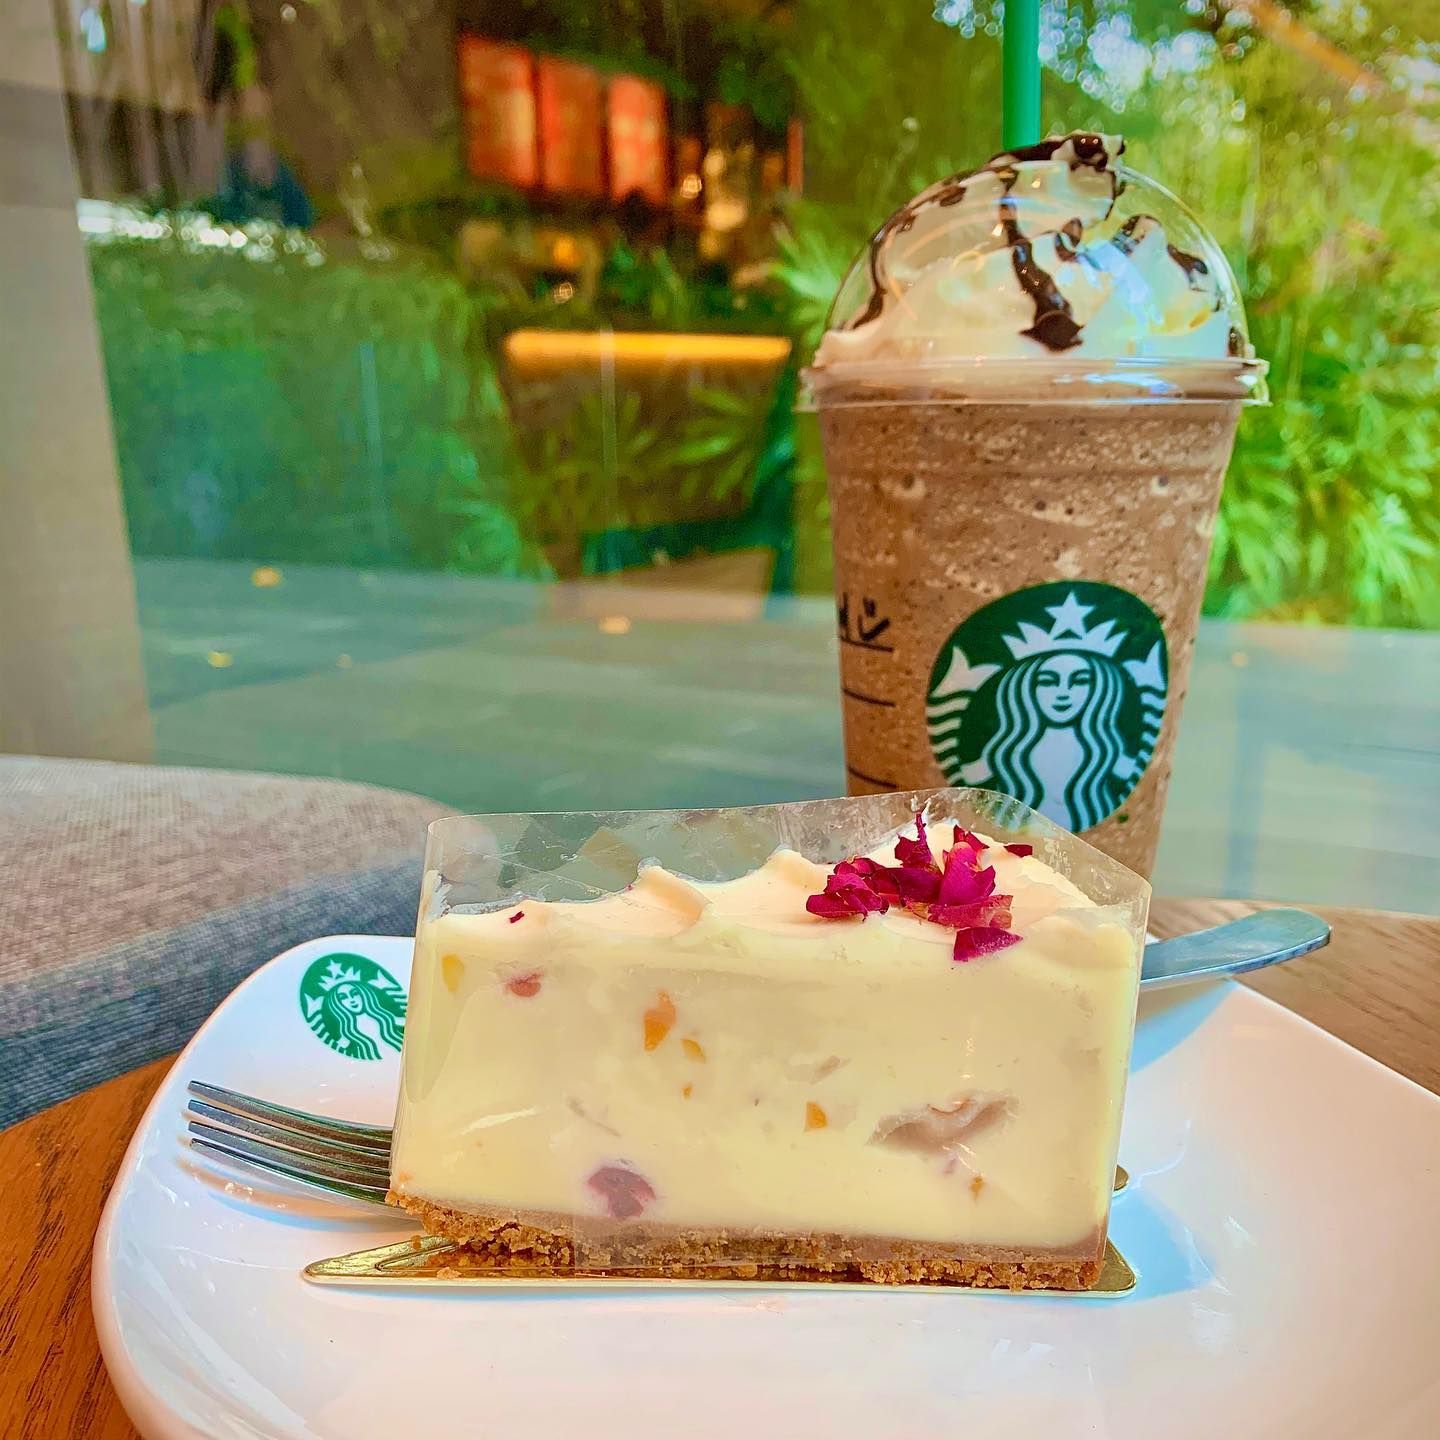 tap xe ghe lien - duy nhat hom nay starbucks tung khuyen mai 2 ly chi 110k  - anh 7